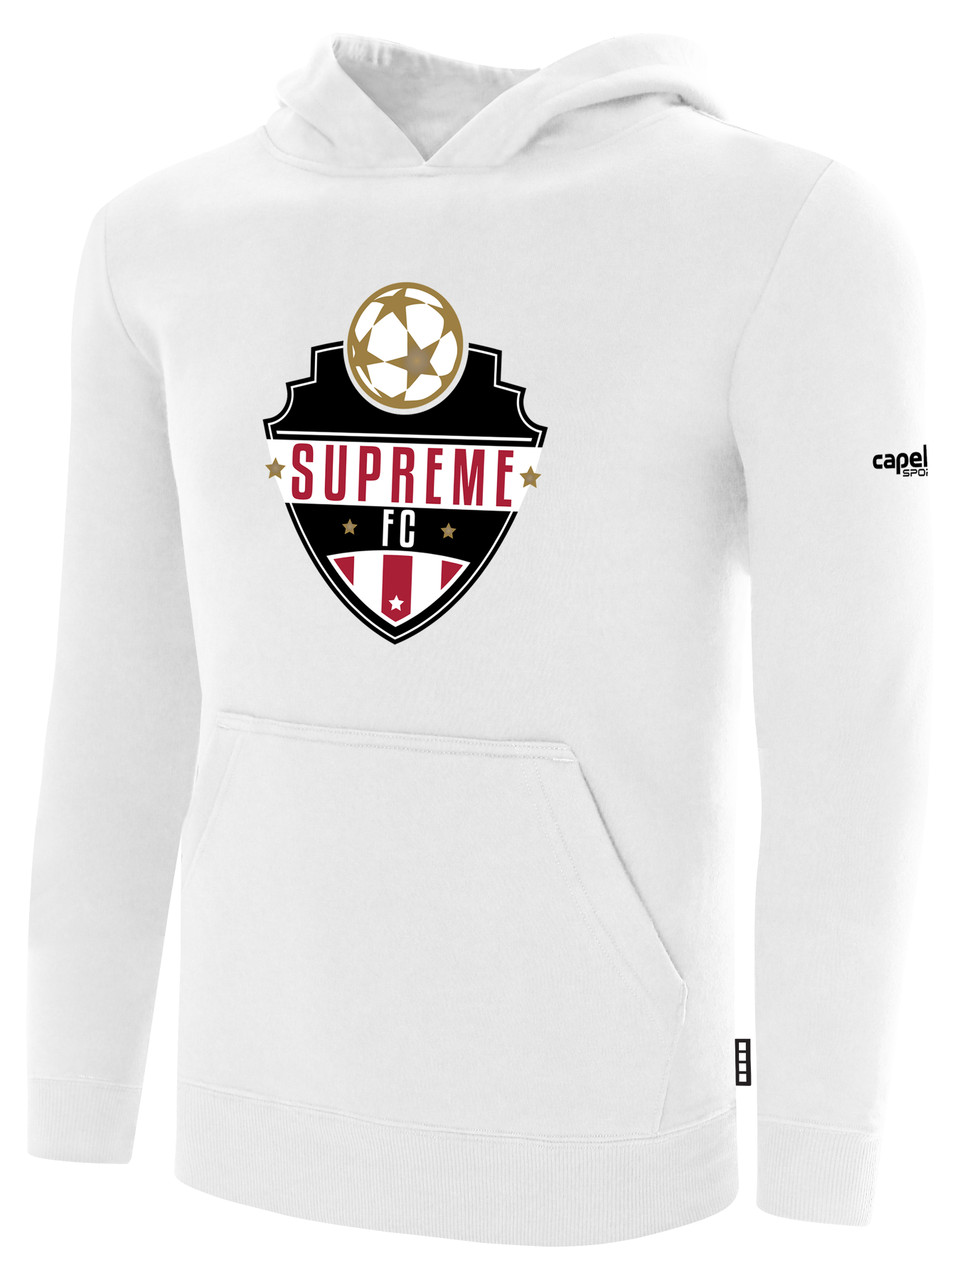 SUPREME FC FLEECE PULL OVER HOODIE SUPREME FC LOGO ON WEARERS FRONT